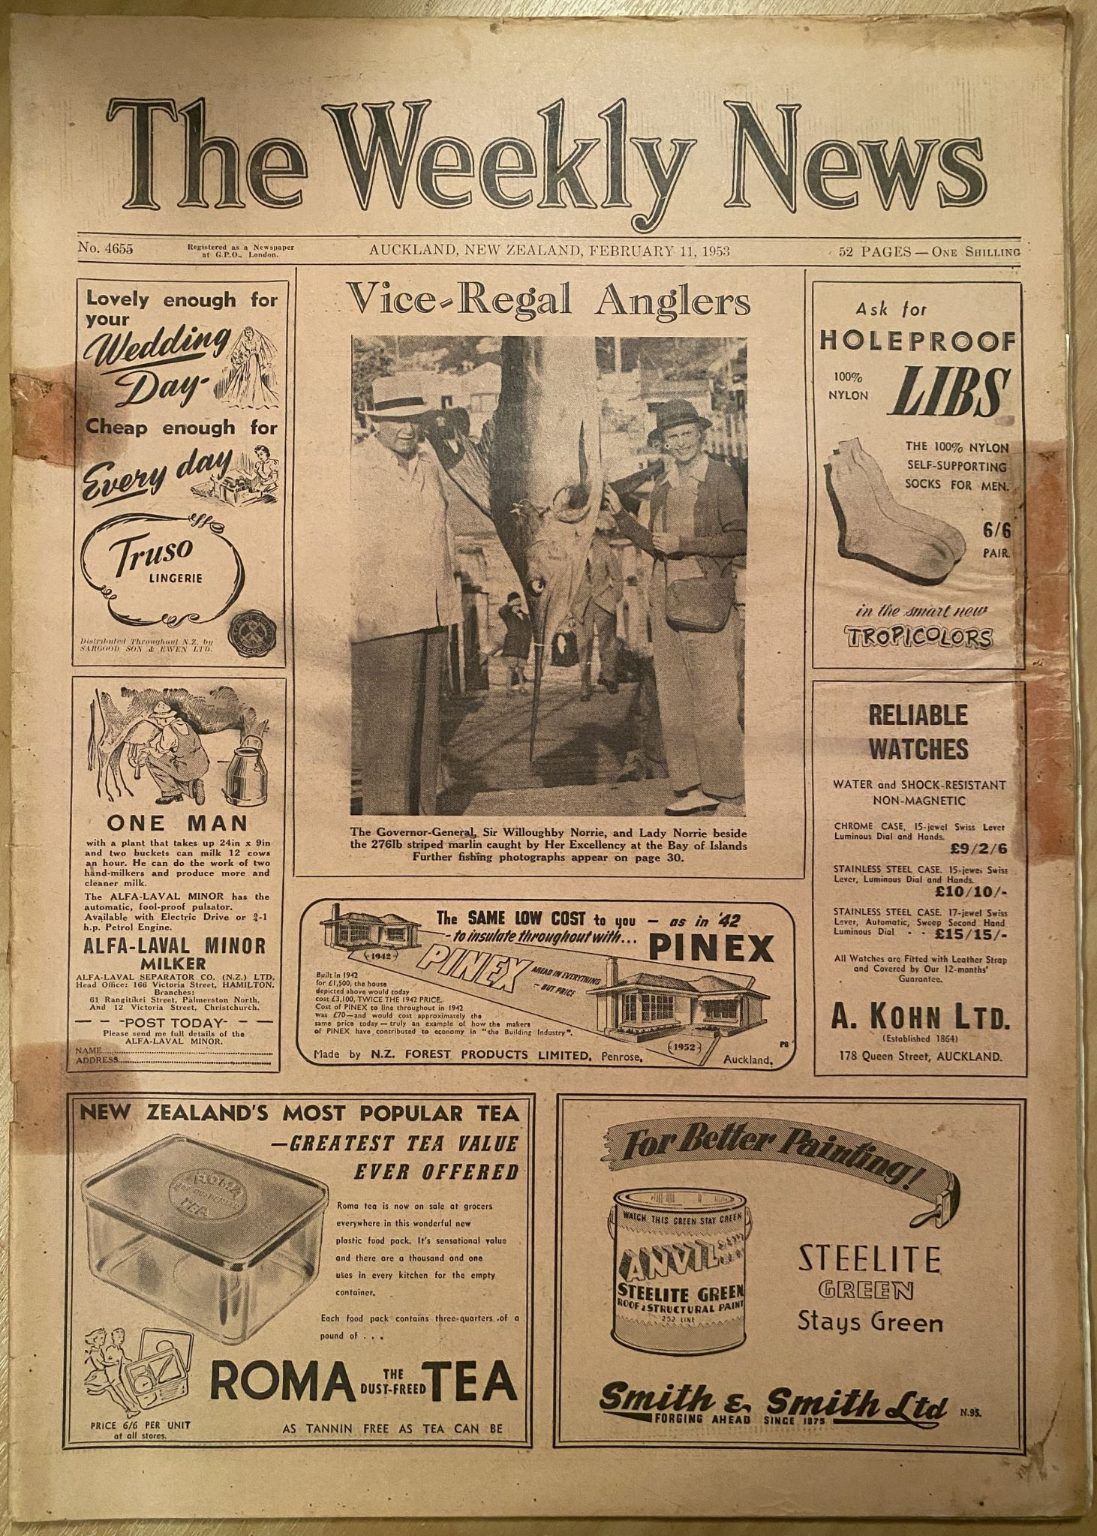 OLD NEWSPAPER: The Weekly News - No. 4655, 11 February 1953